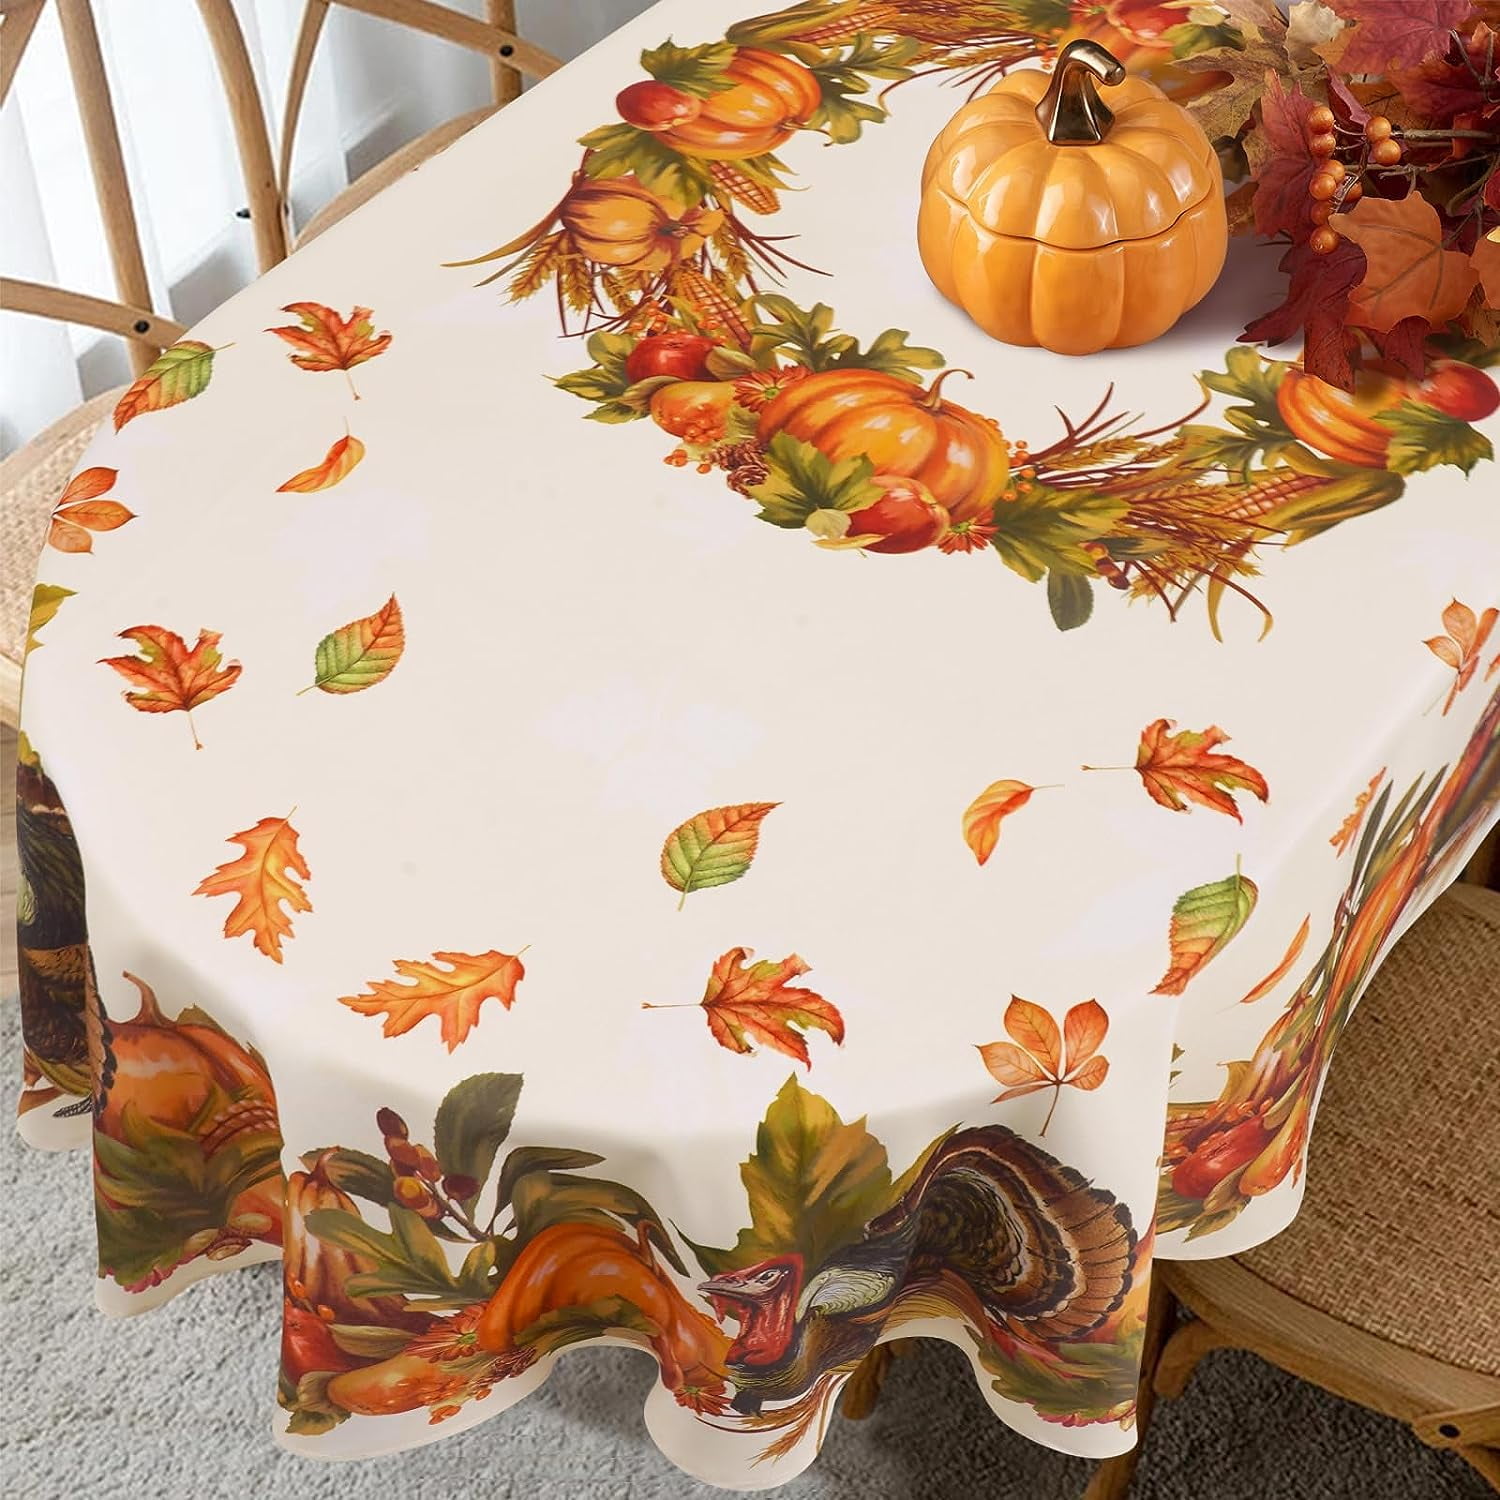 Fall Thanksgiving Tablecloth for Round,Oval,Rectangle Tables,Waterproof ...